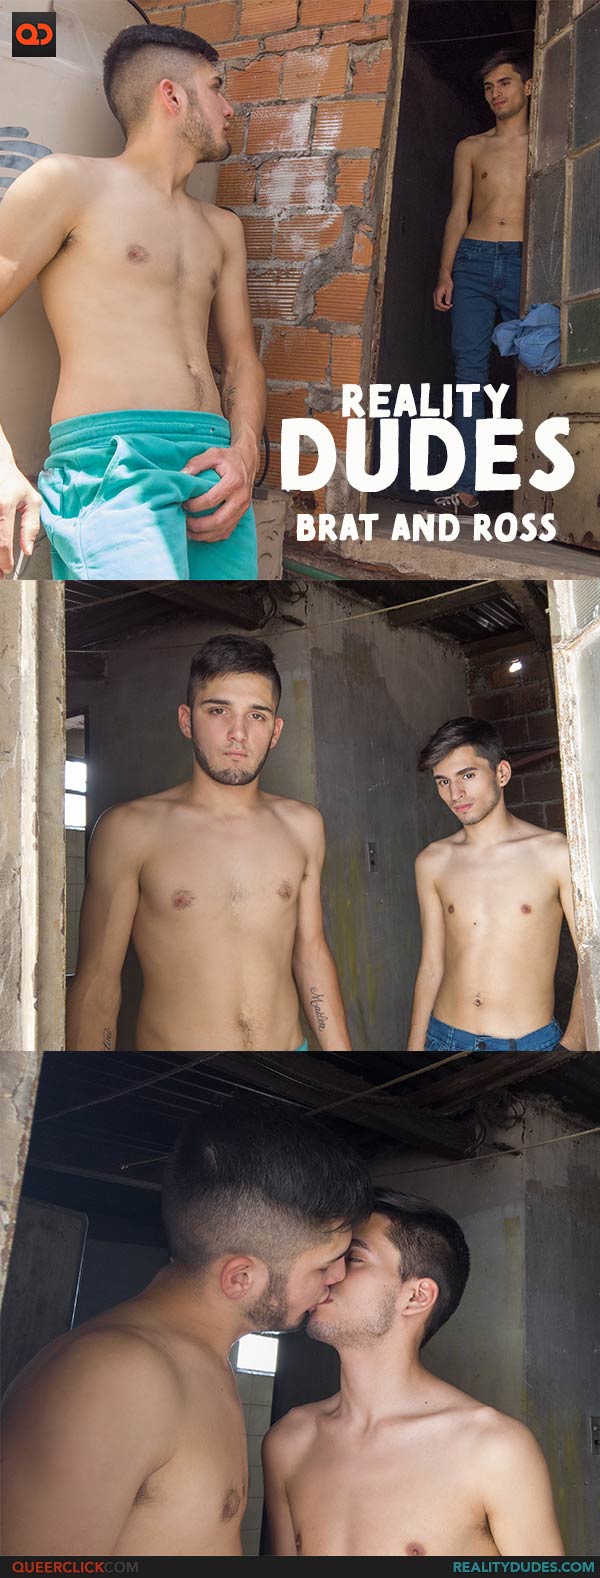 RealityDudes: Brat and Ross